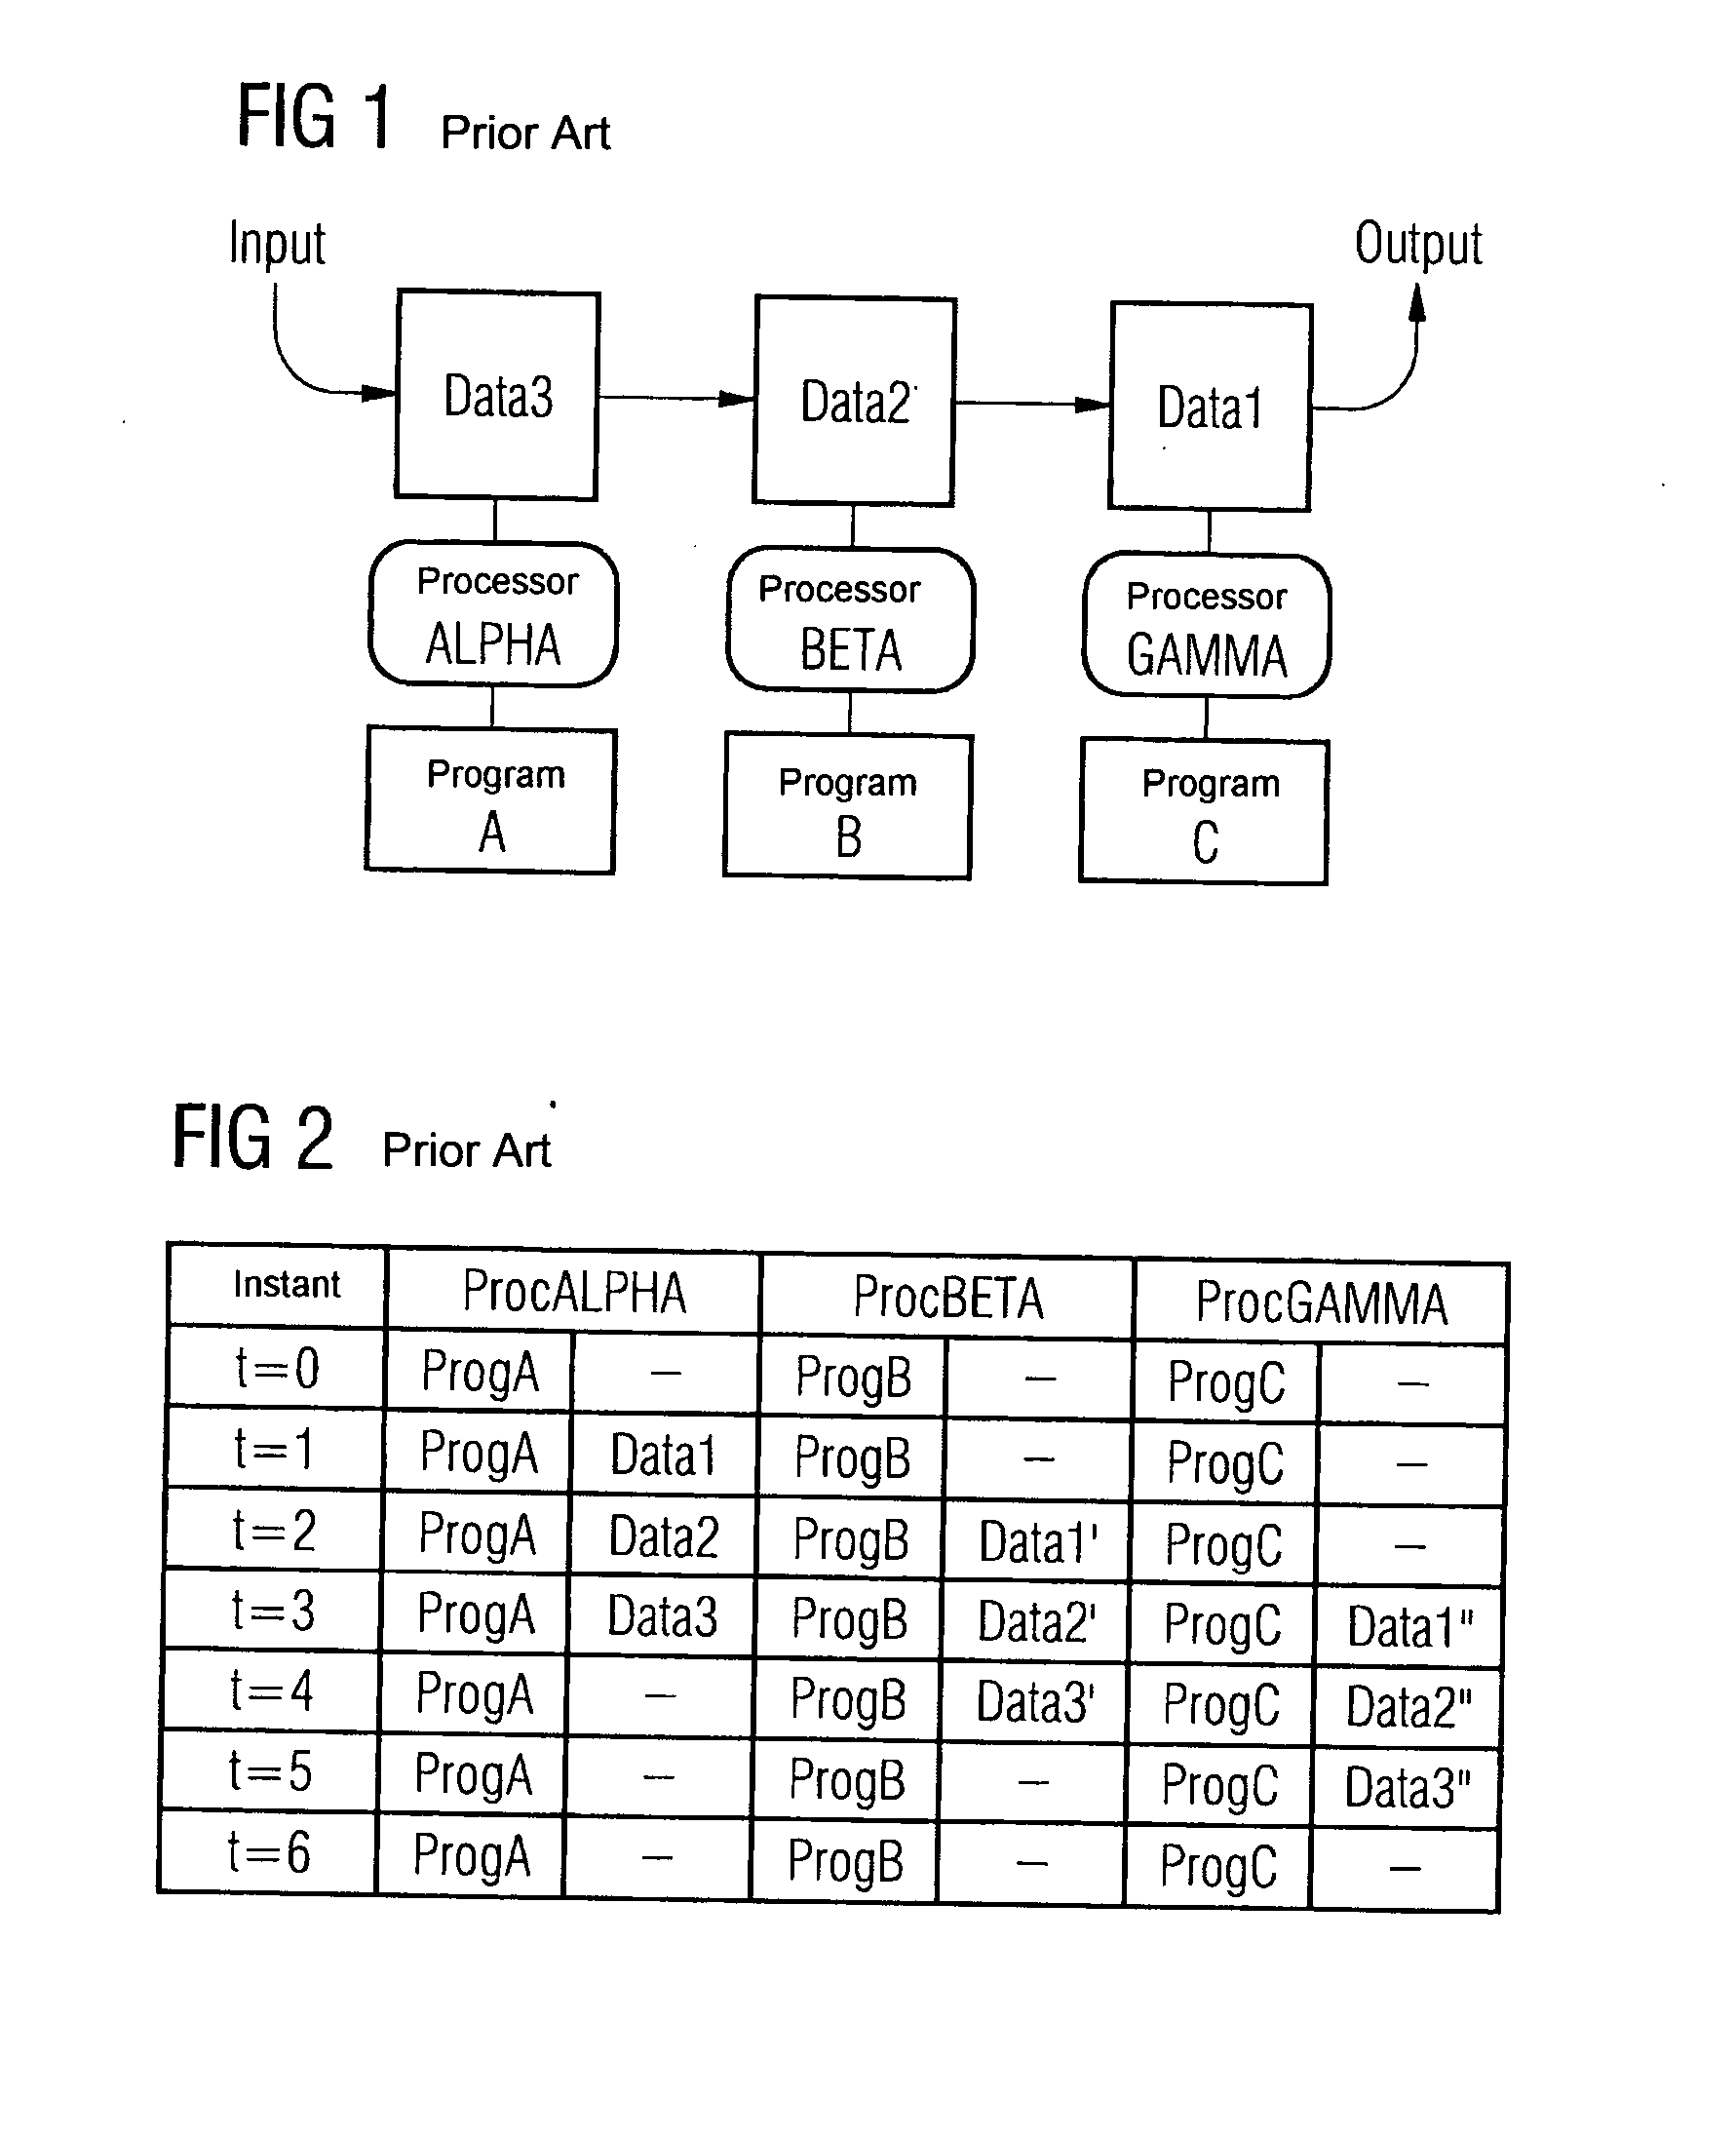 Method for processing streaming data in a multiprocessor system